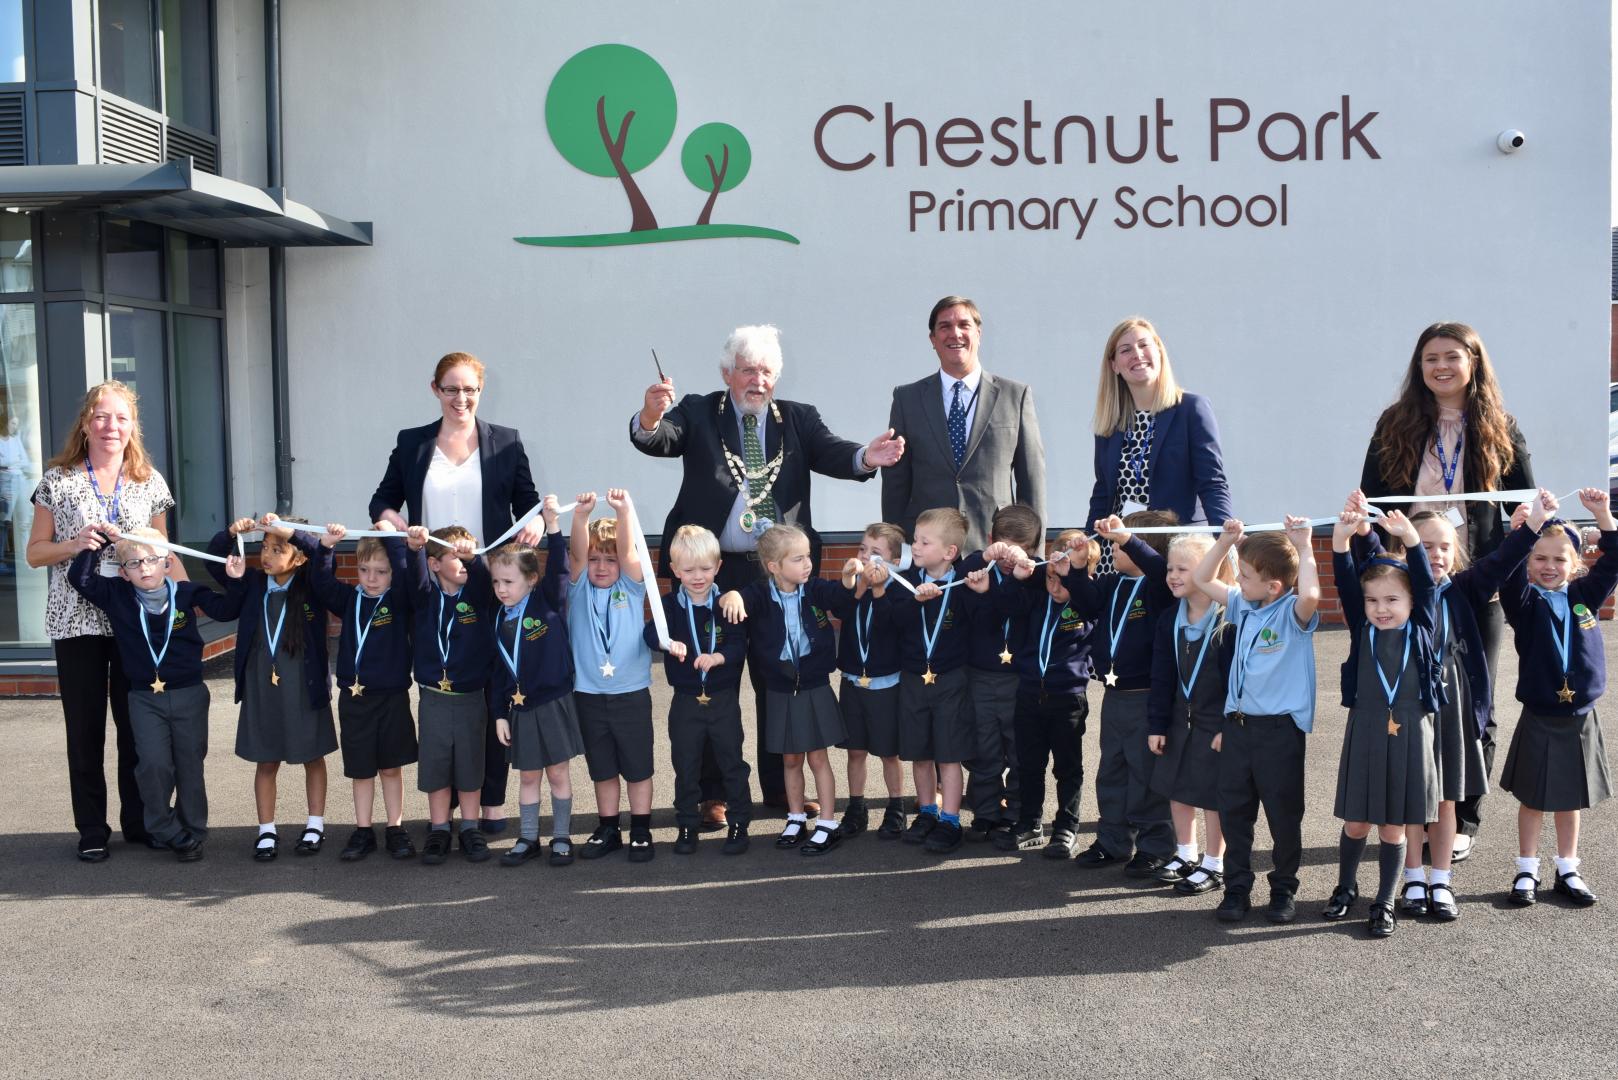 Official opening of Chestnut Park Primary School in Yatton